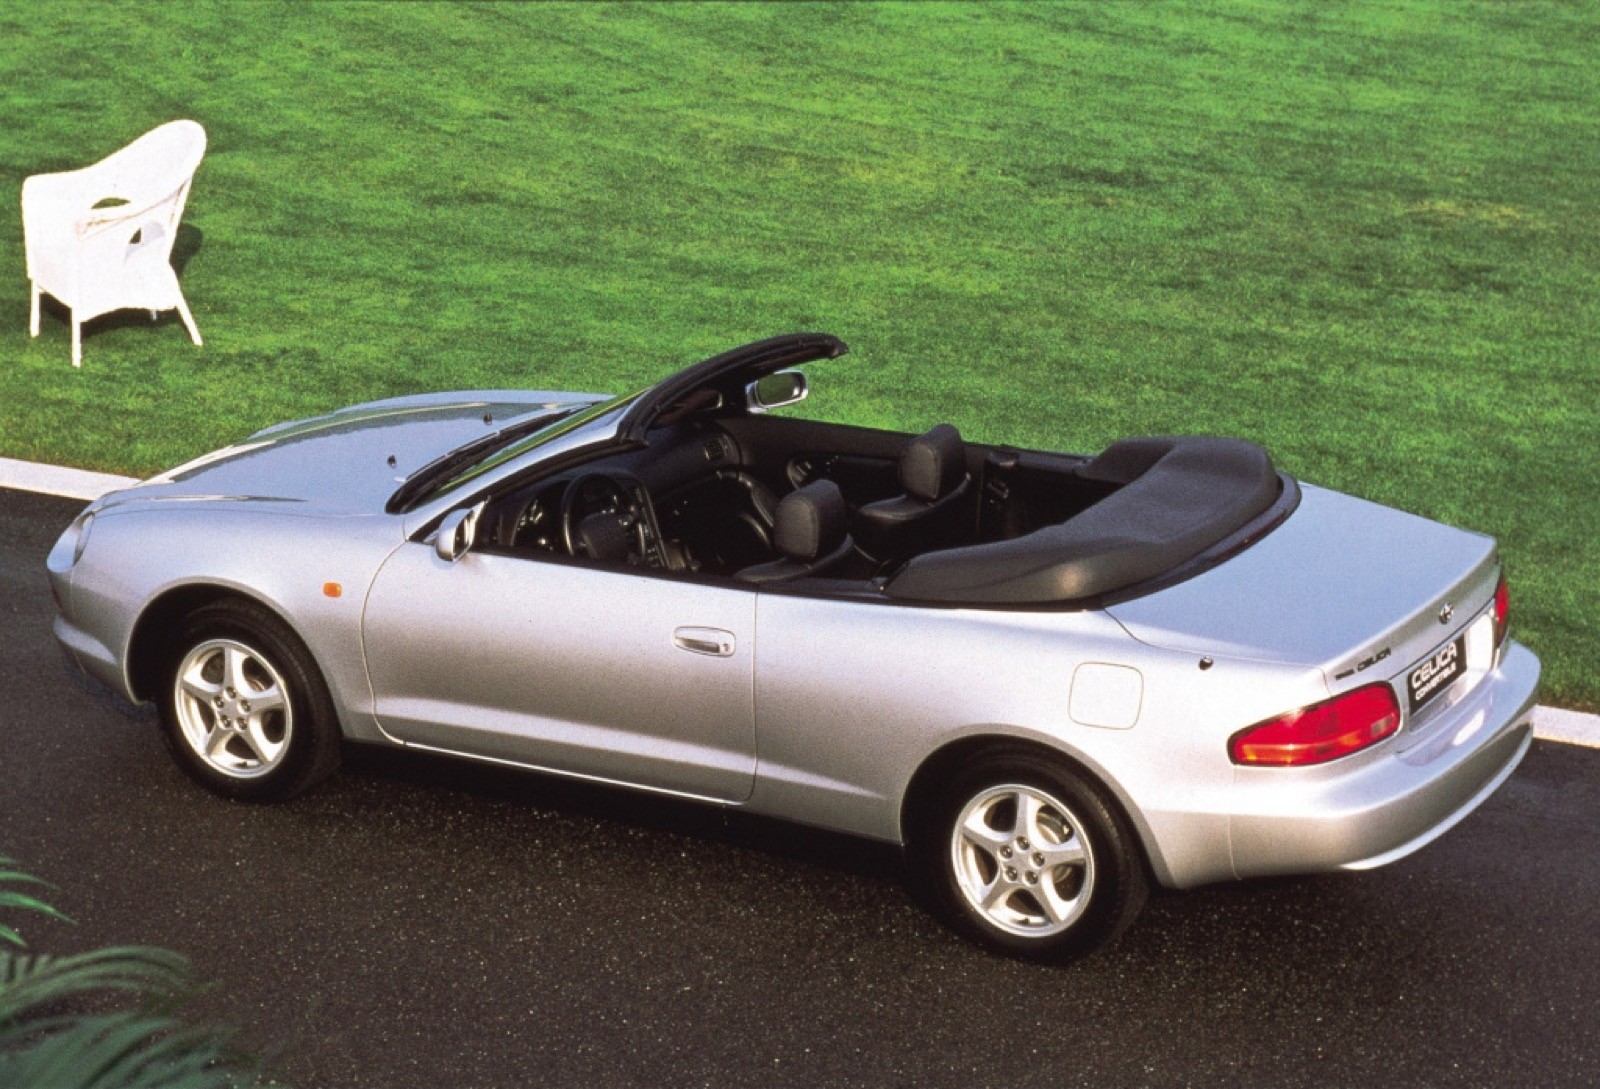 big four-seater convertibles